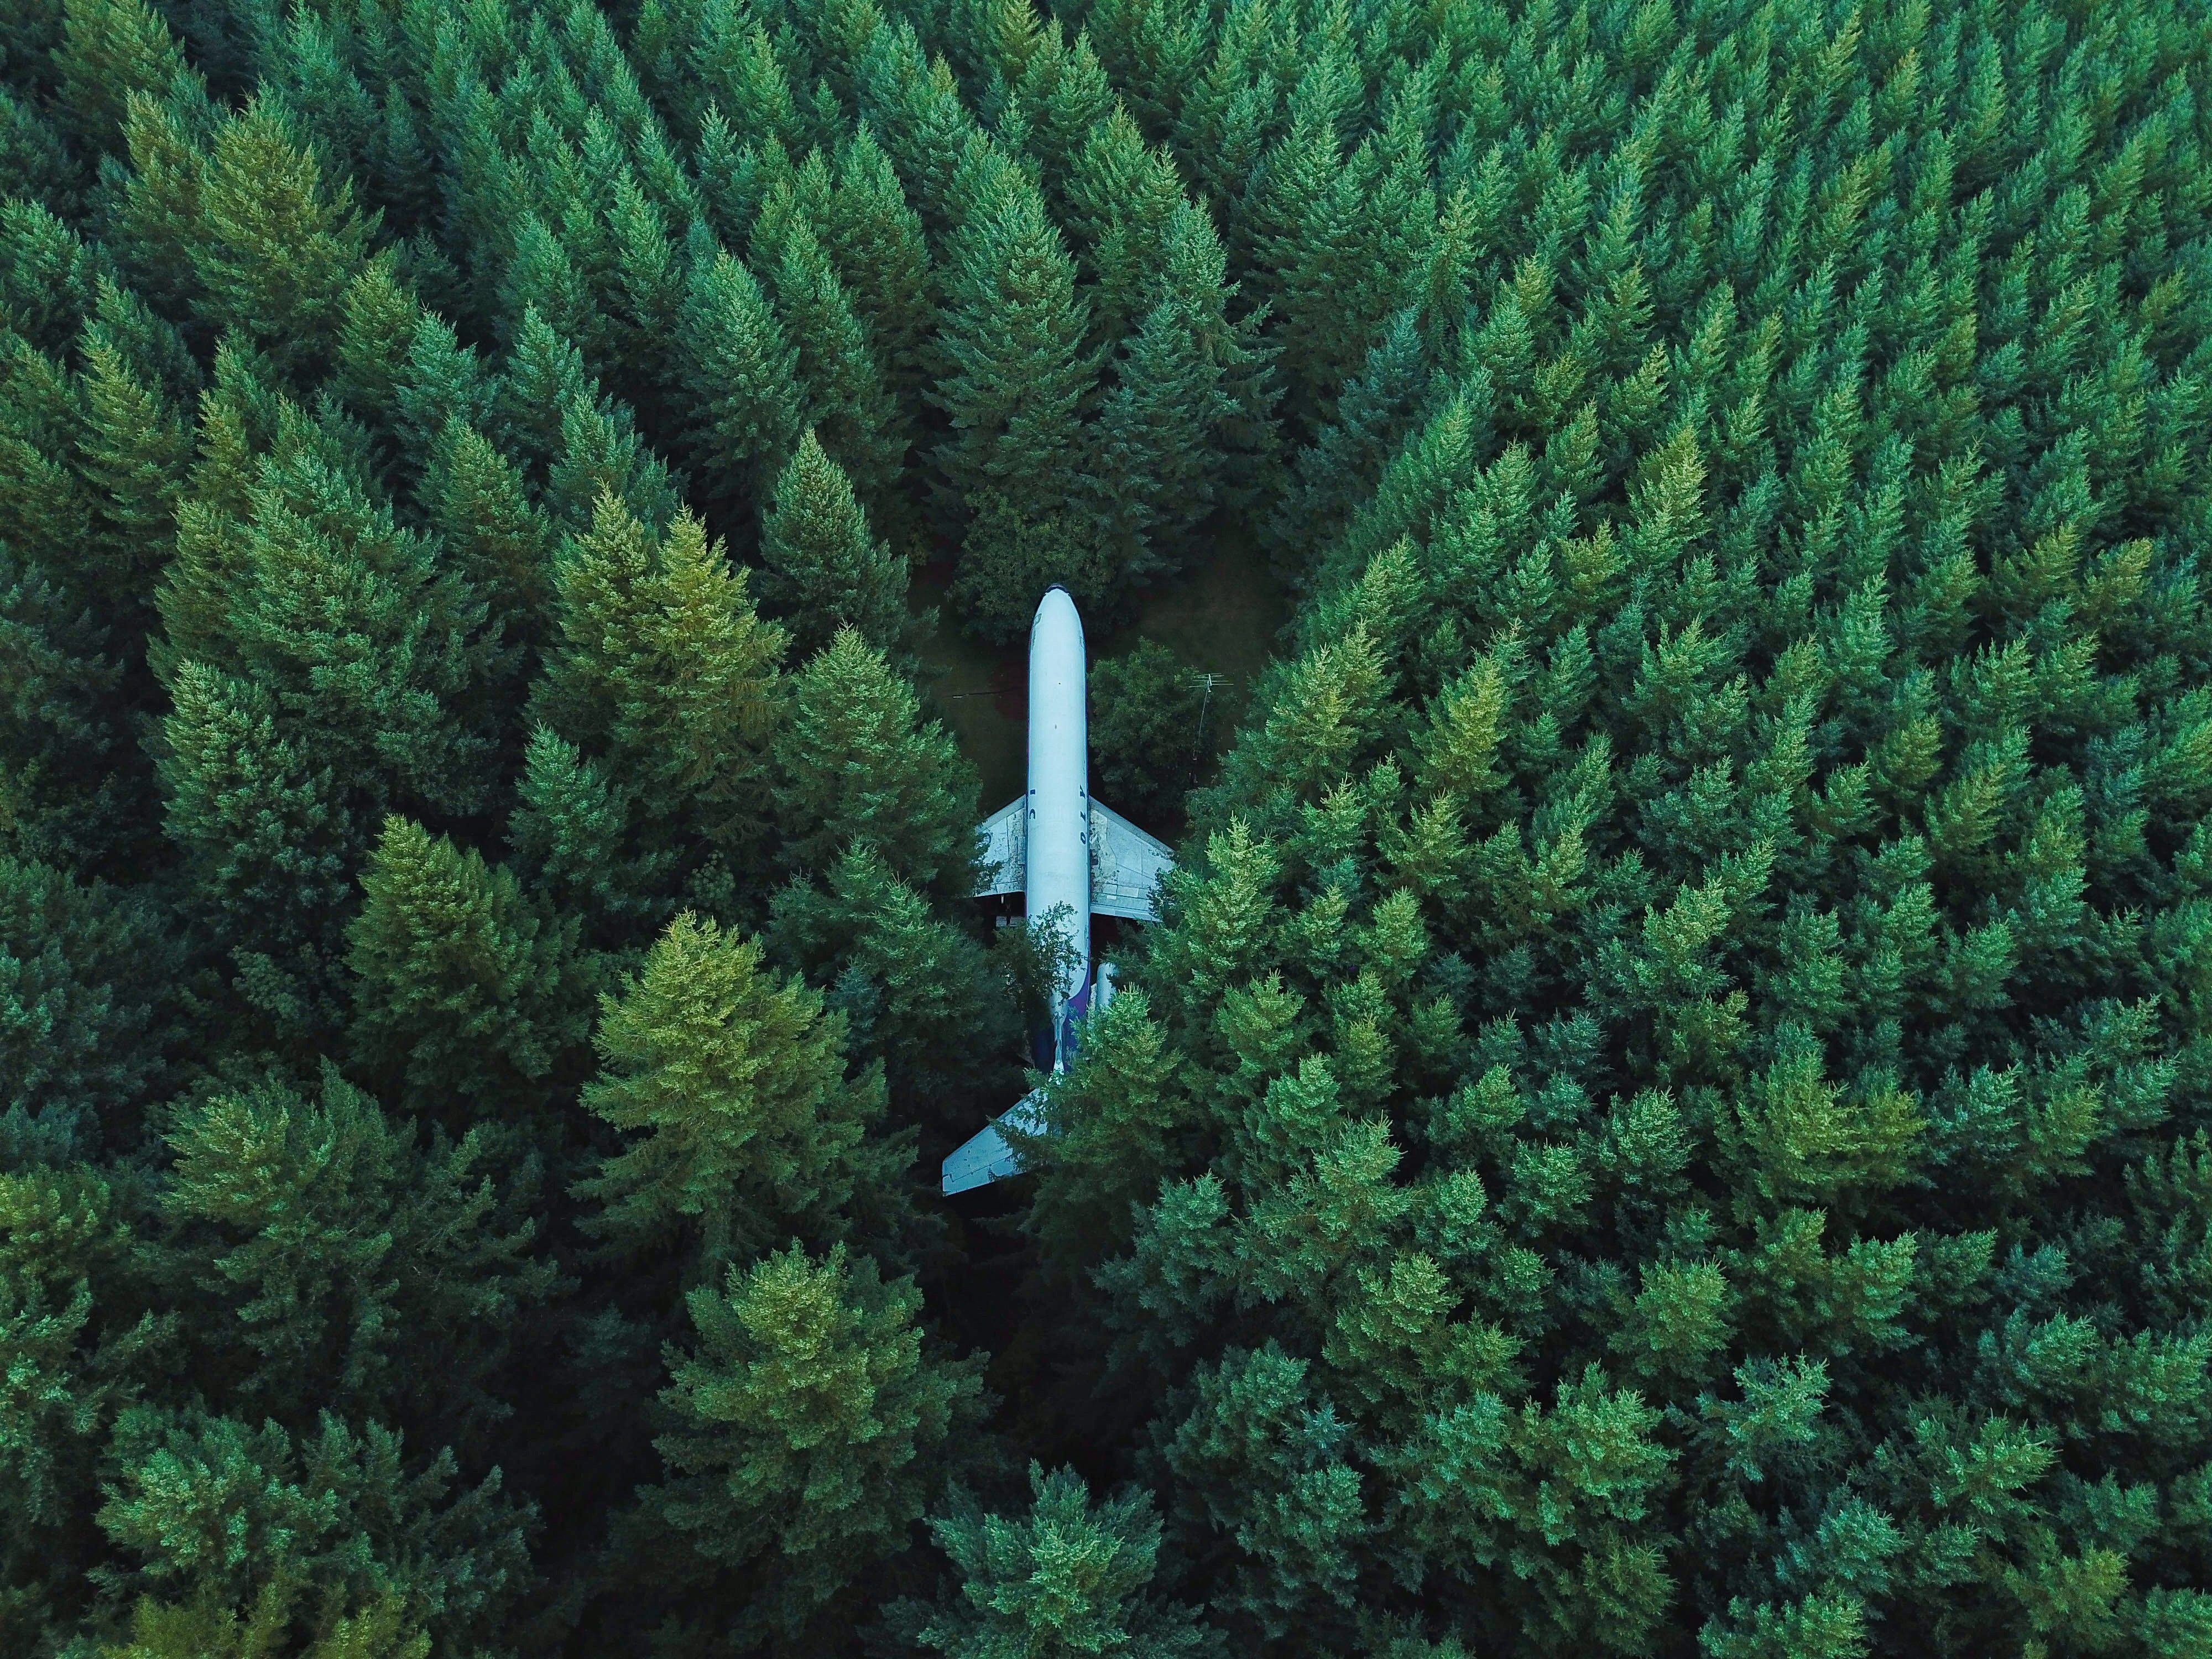 trees, plane, miscellanea, view from above, miscellaneous, airplane